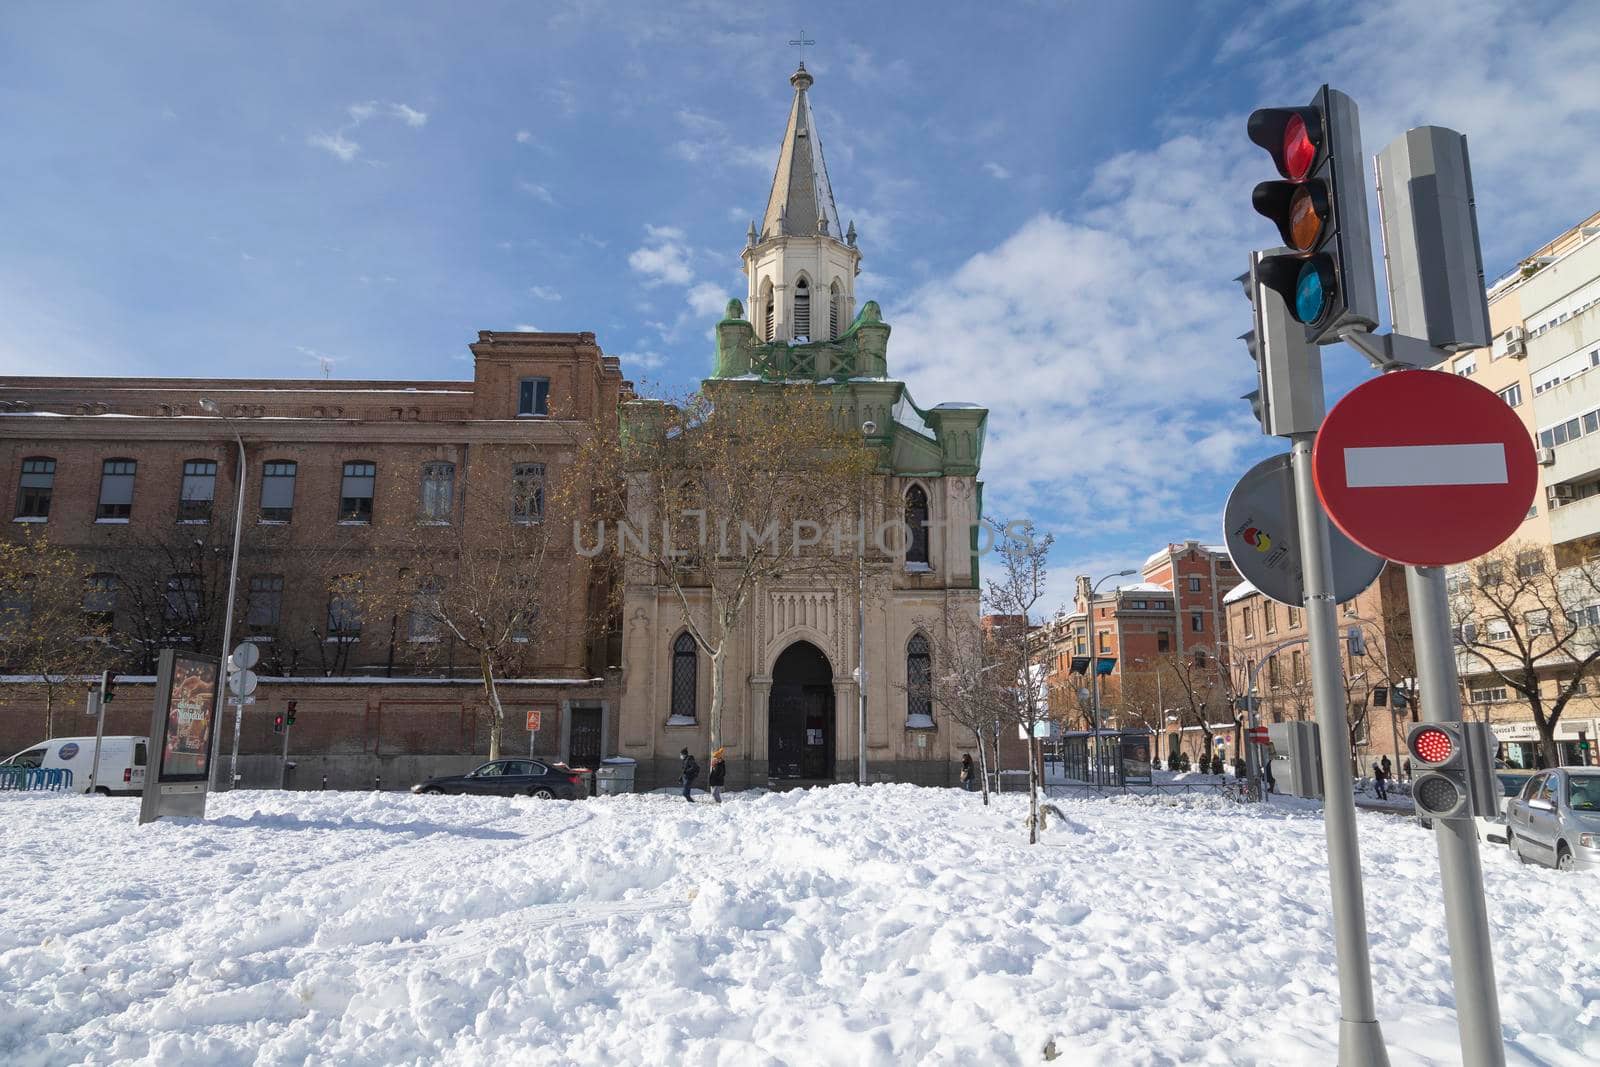 Church of Our Lady of La Paz, on a snowy day, Madrid. by alvarobueno